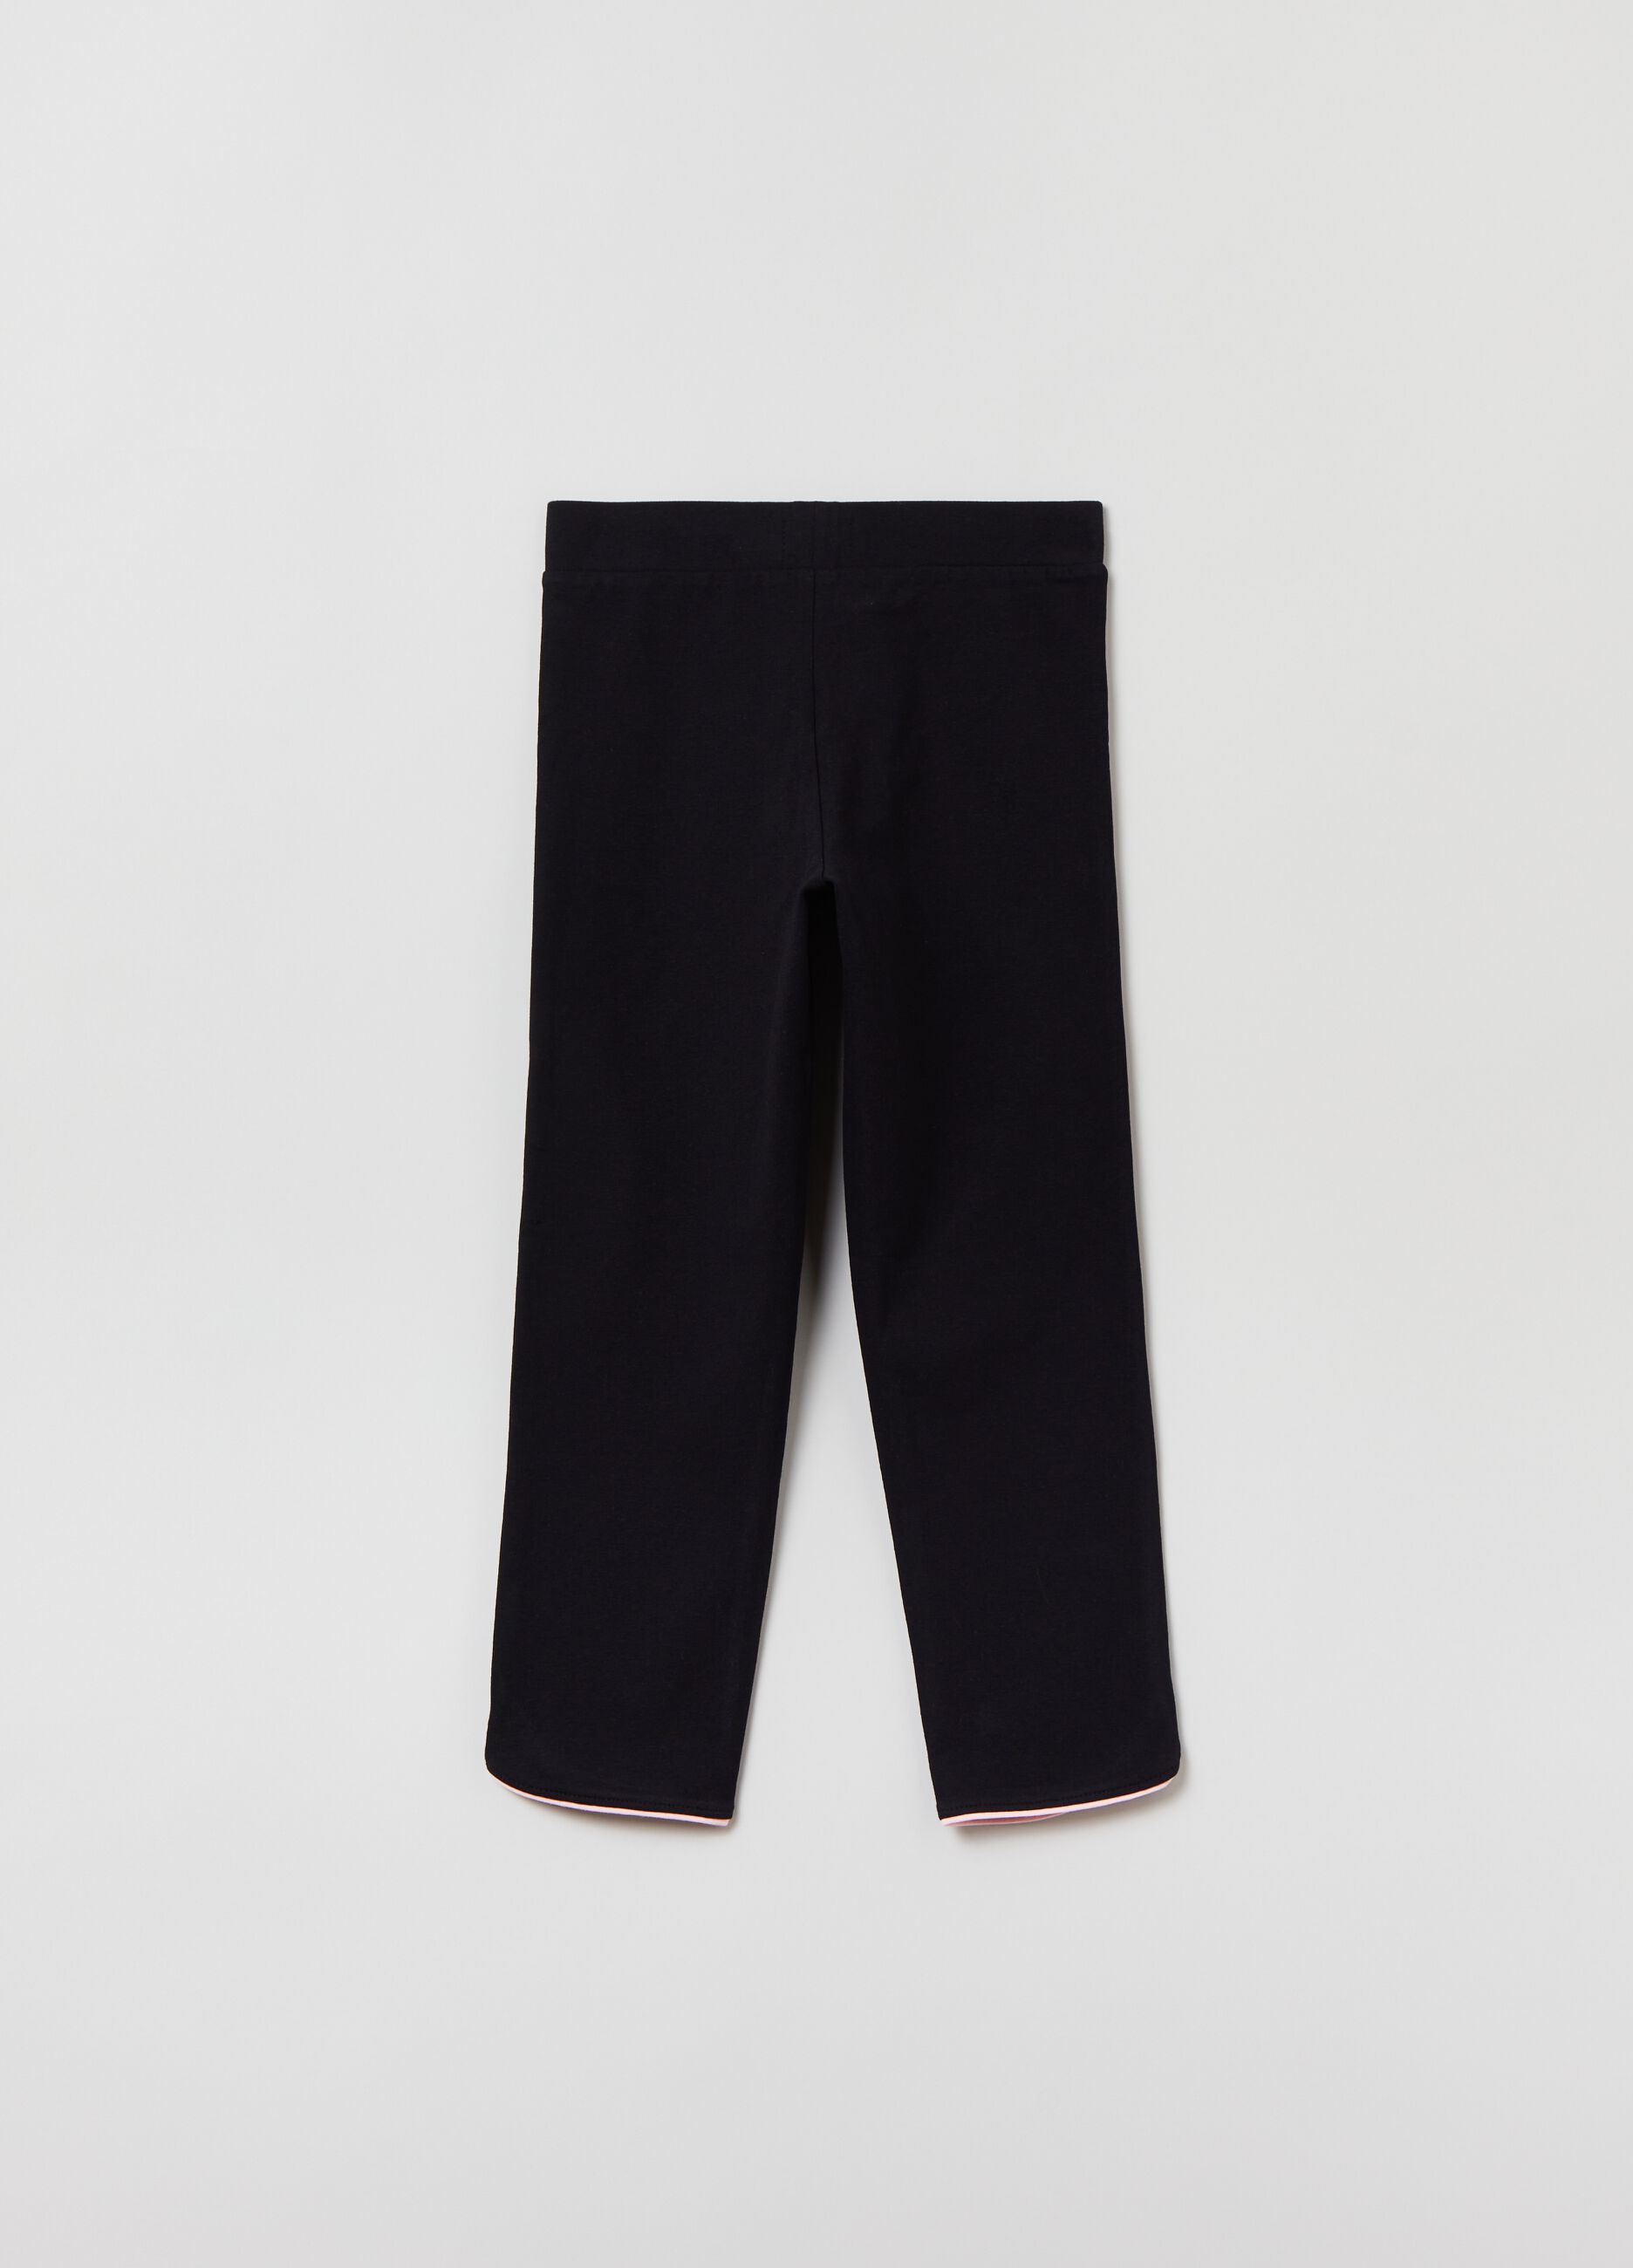 Stretch leggings with contrasting edging